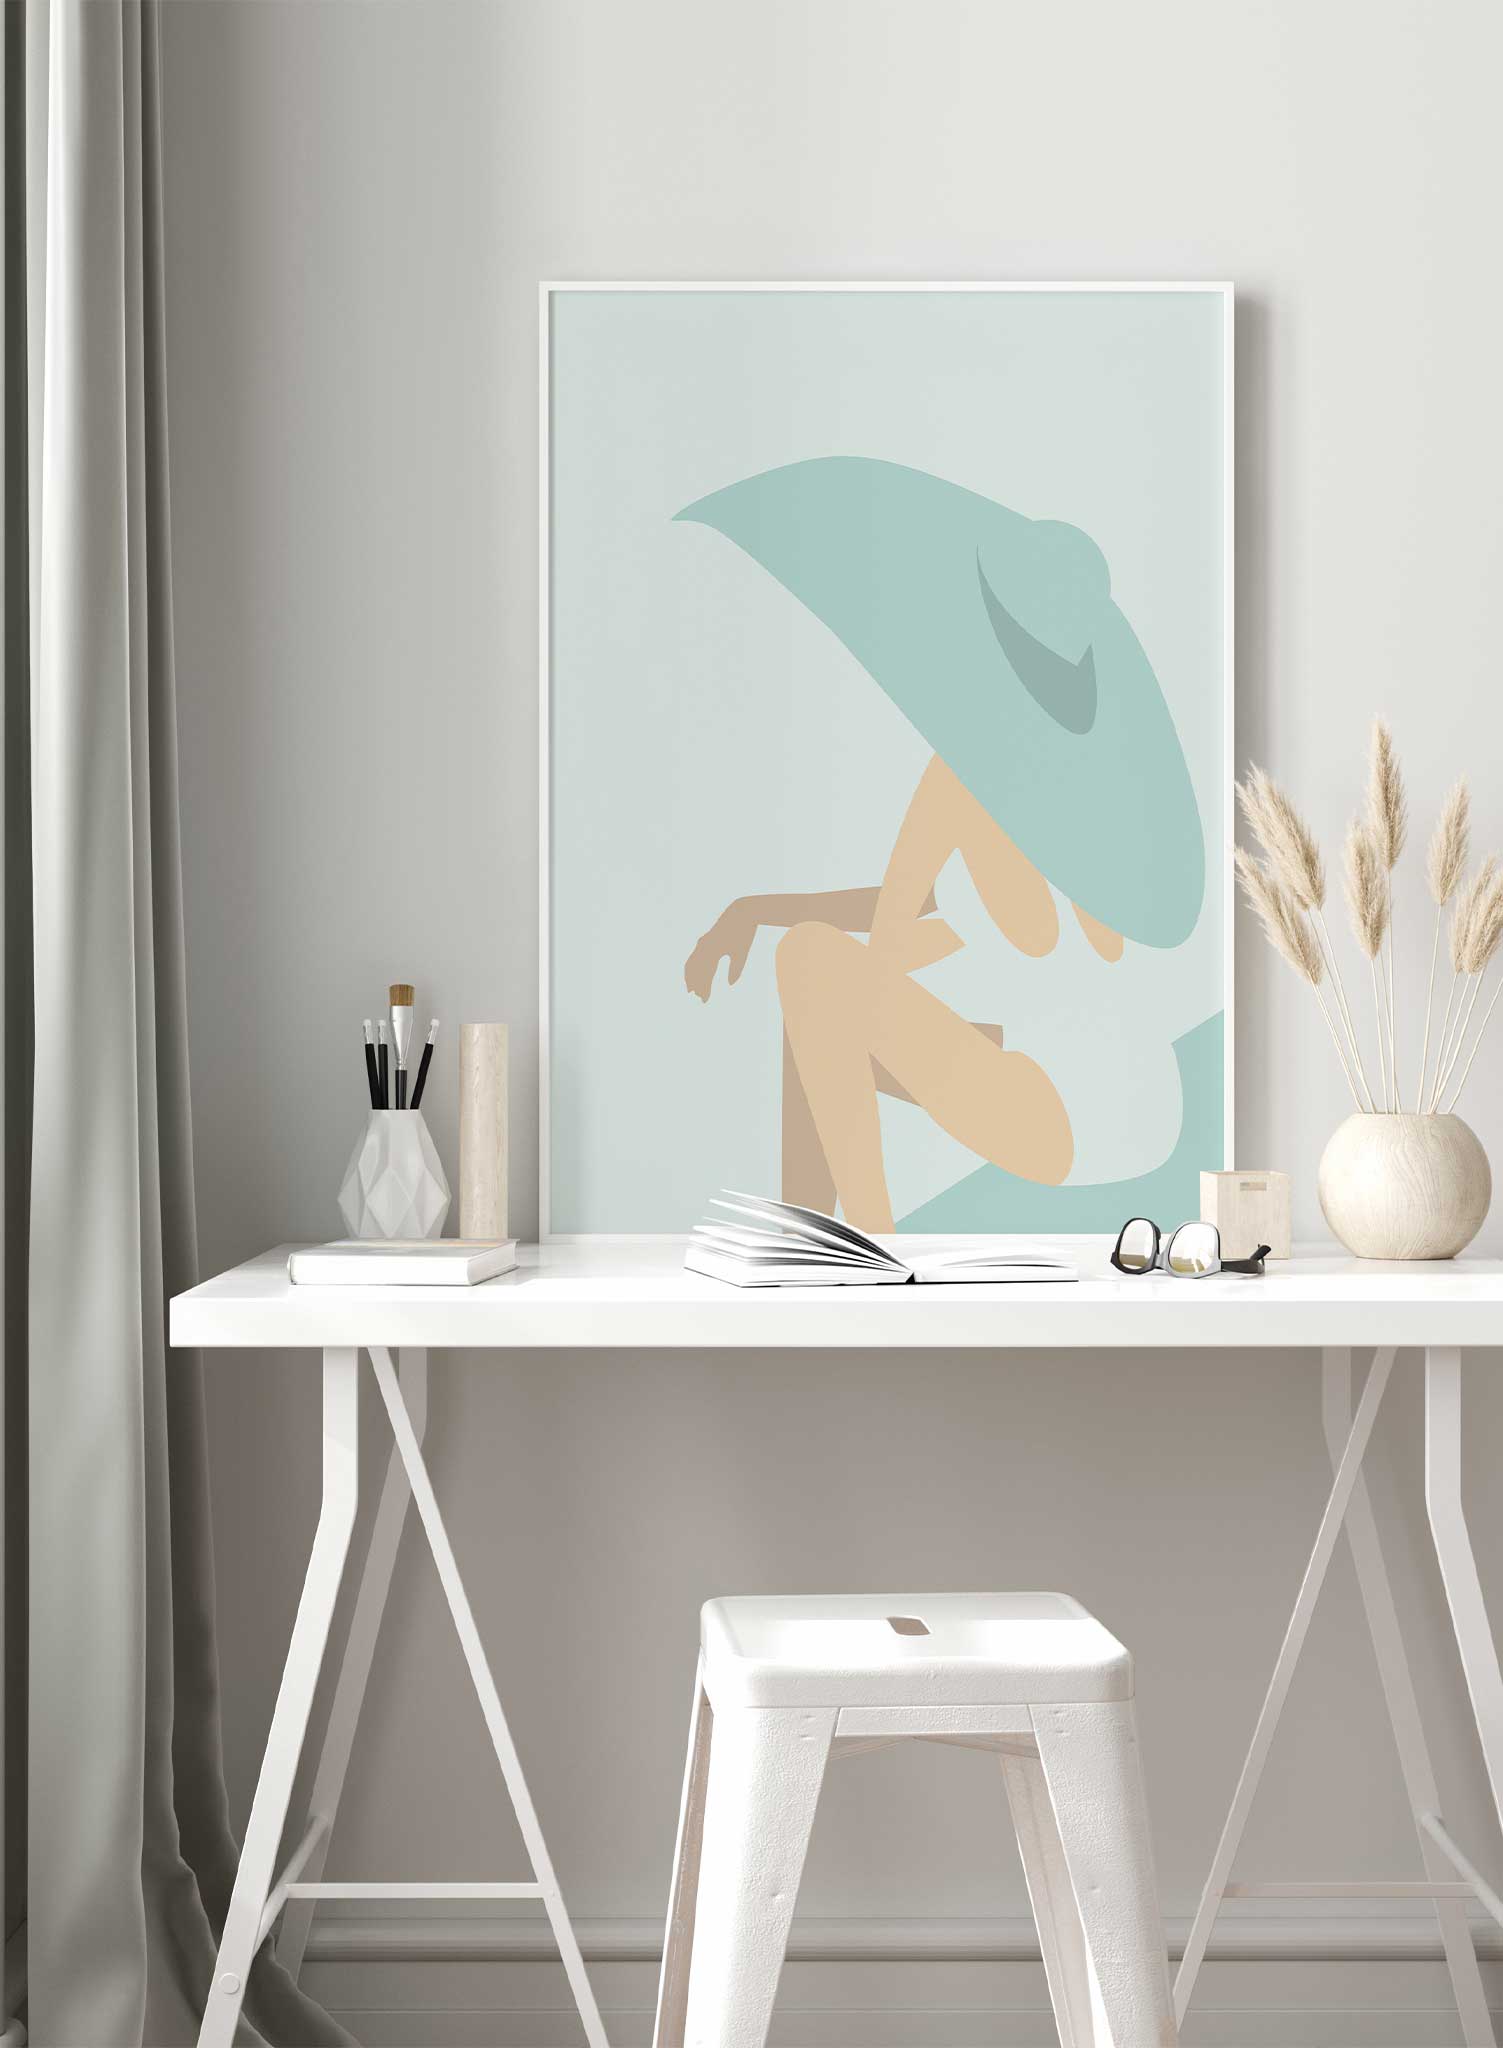 Poolside Diva in Aqua is a minimalist illustration poster of a woman sitting and wearing a large sunhat by Opposite Wall.